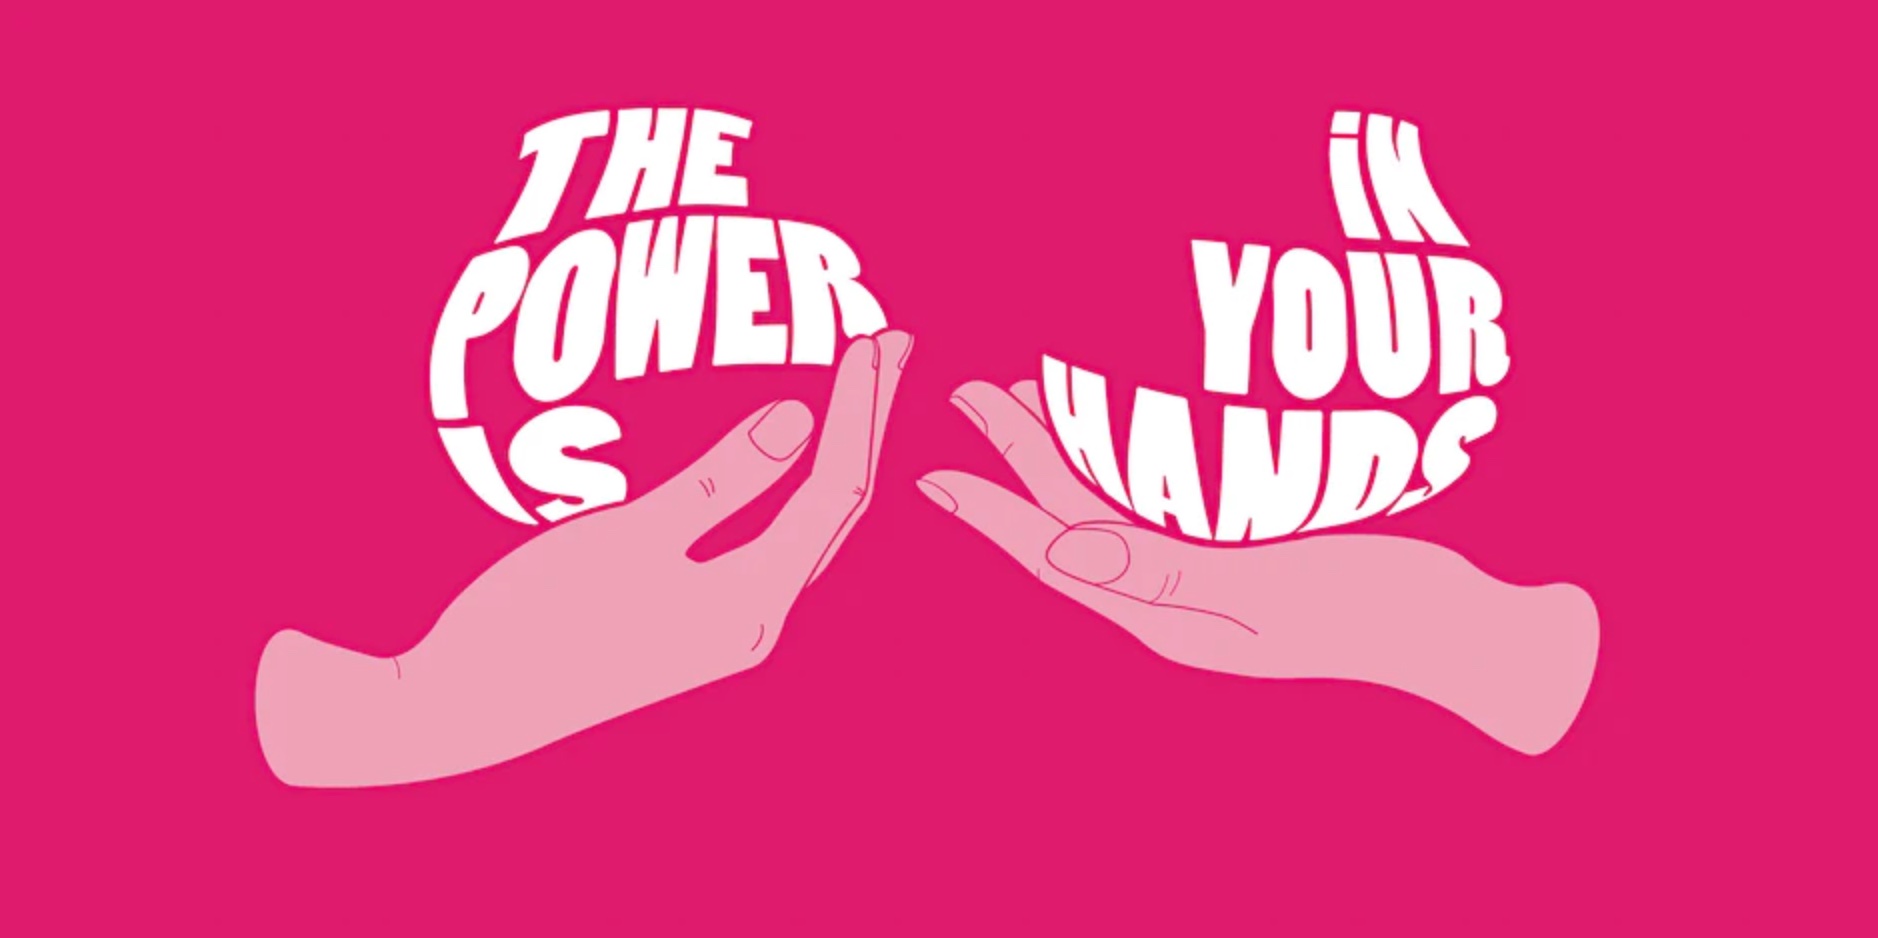 the power is in your hands